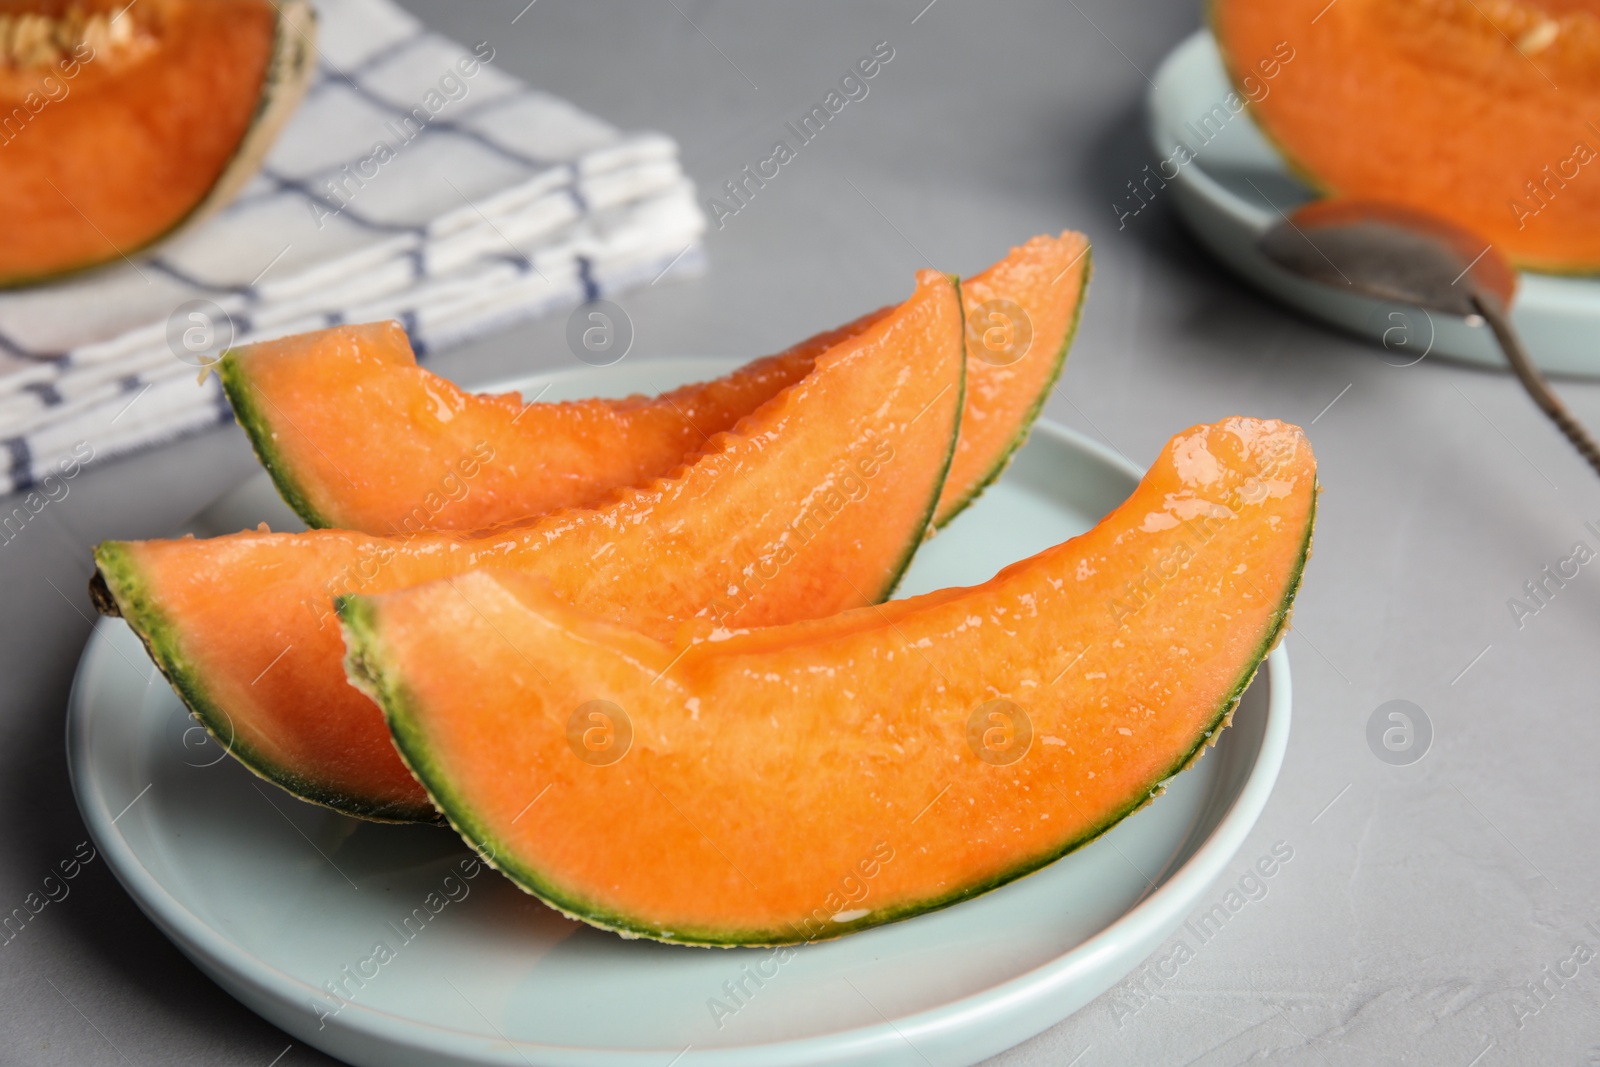 Photo of Slices of ripe cantaloupe melon in plate on grey table